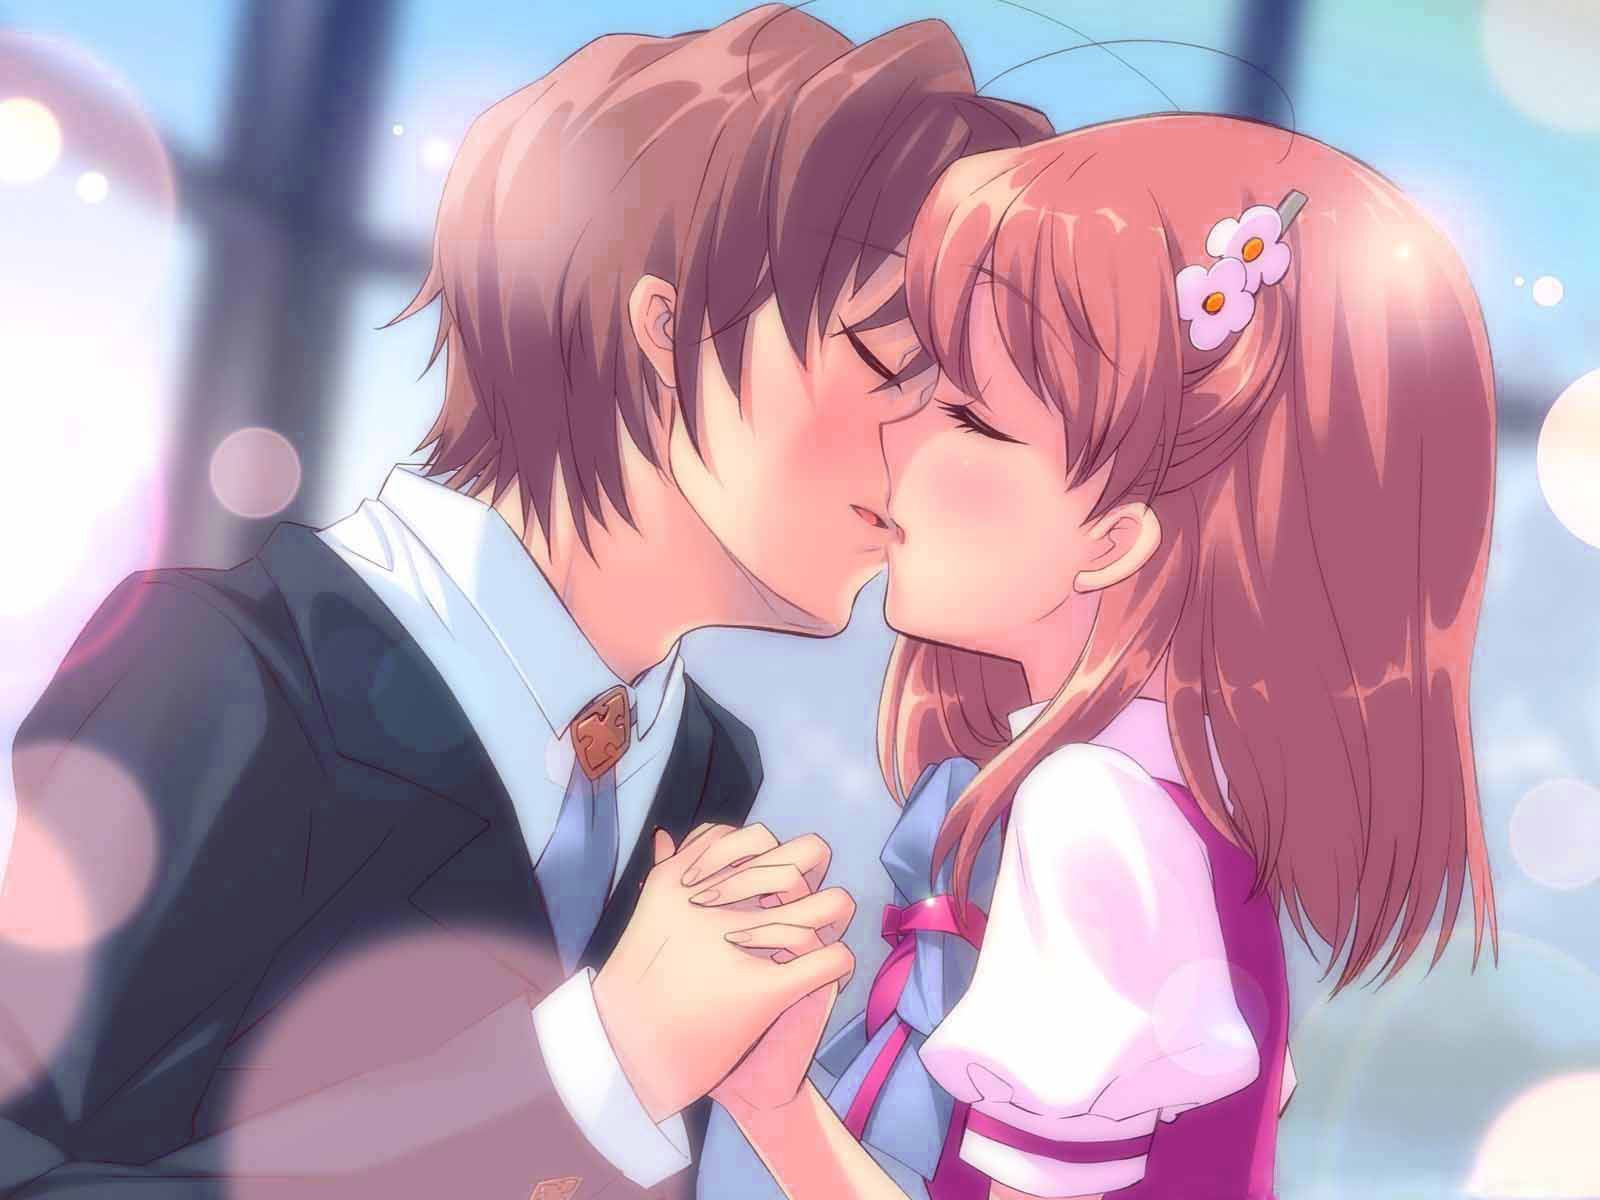 Fore head kiss - anime Wallpaper Download